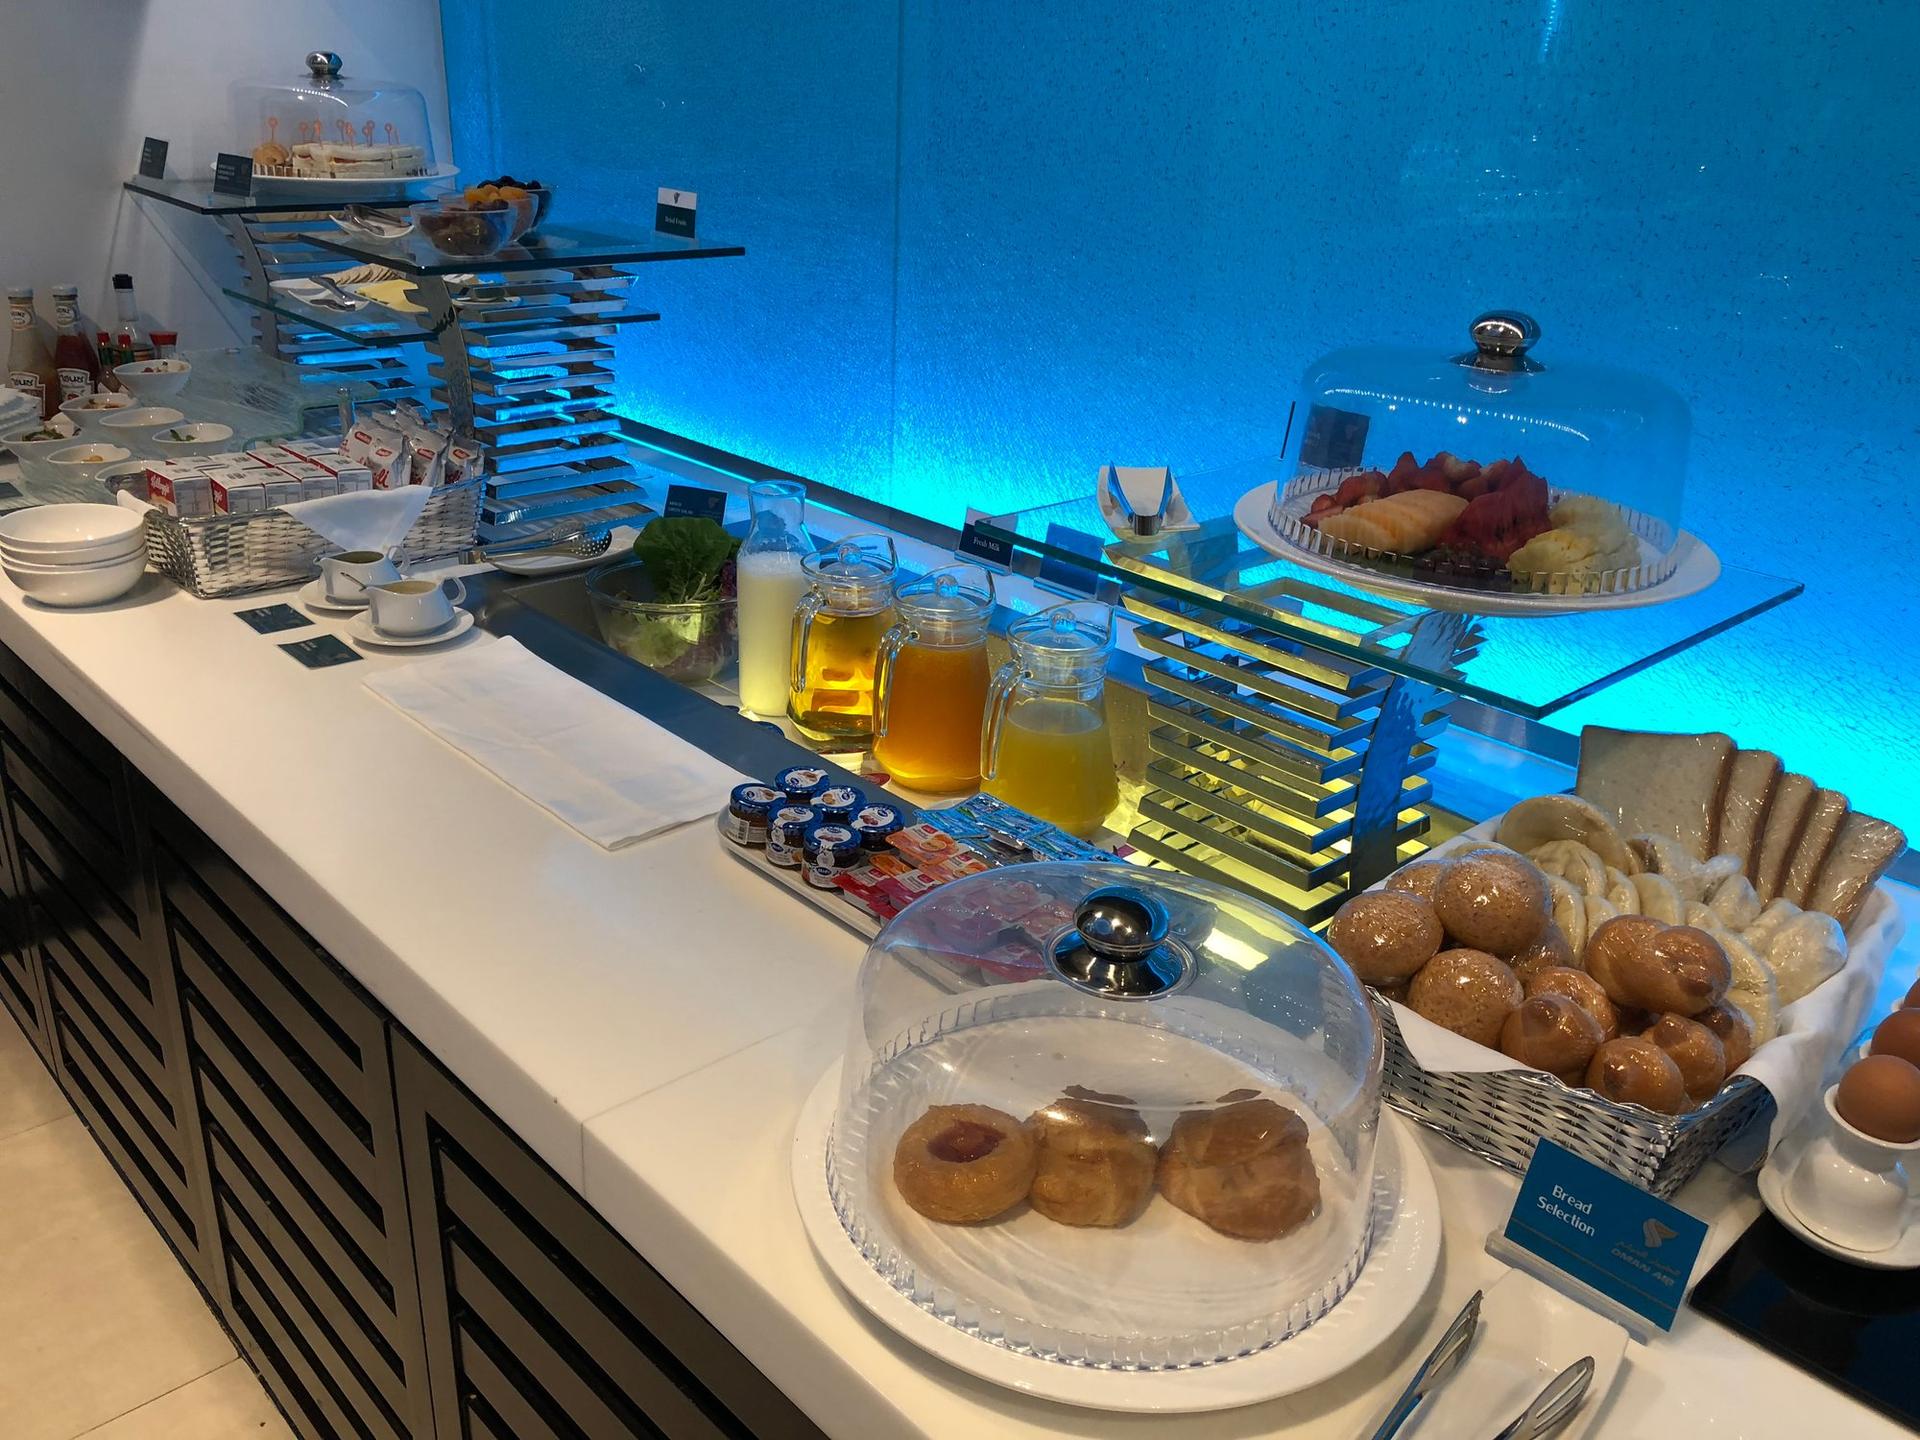 Oman Air First and Business Class Lounge image 16 of 50